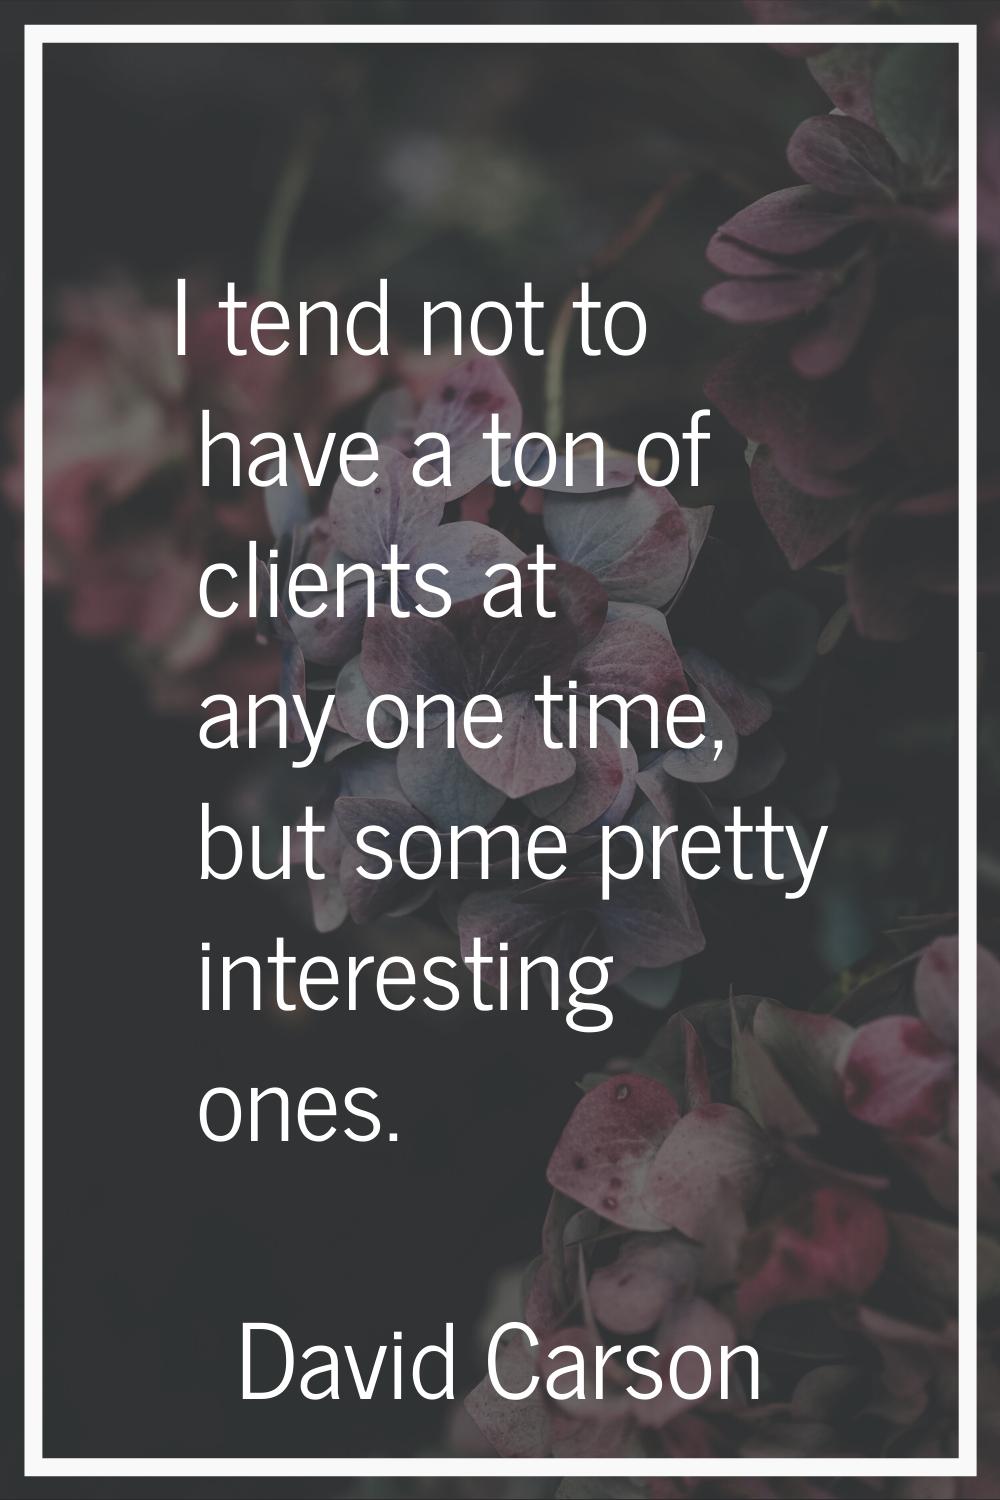 I tend not to have a ton of clients at any one time, but some pretty interesting ones.